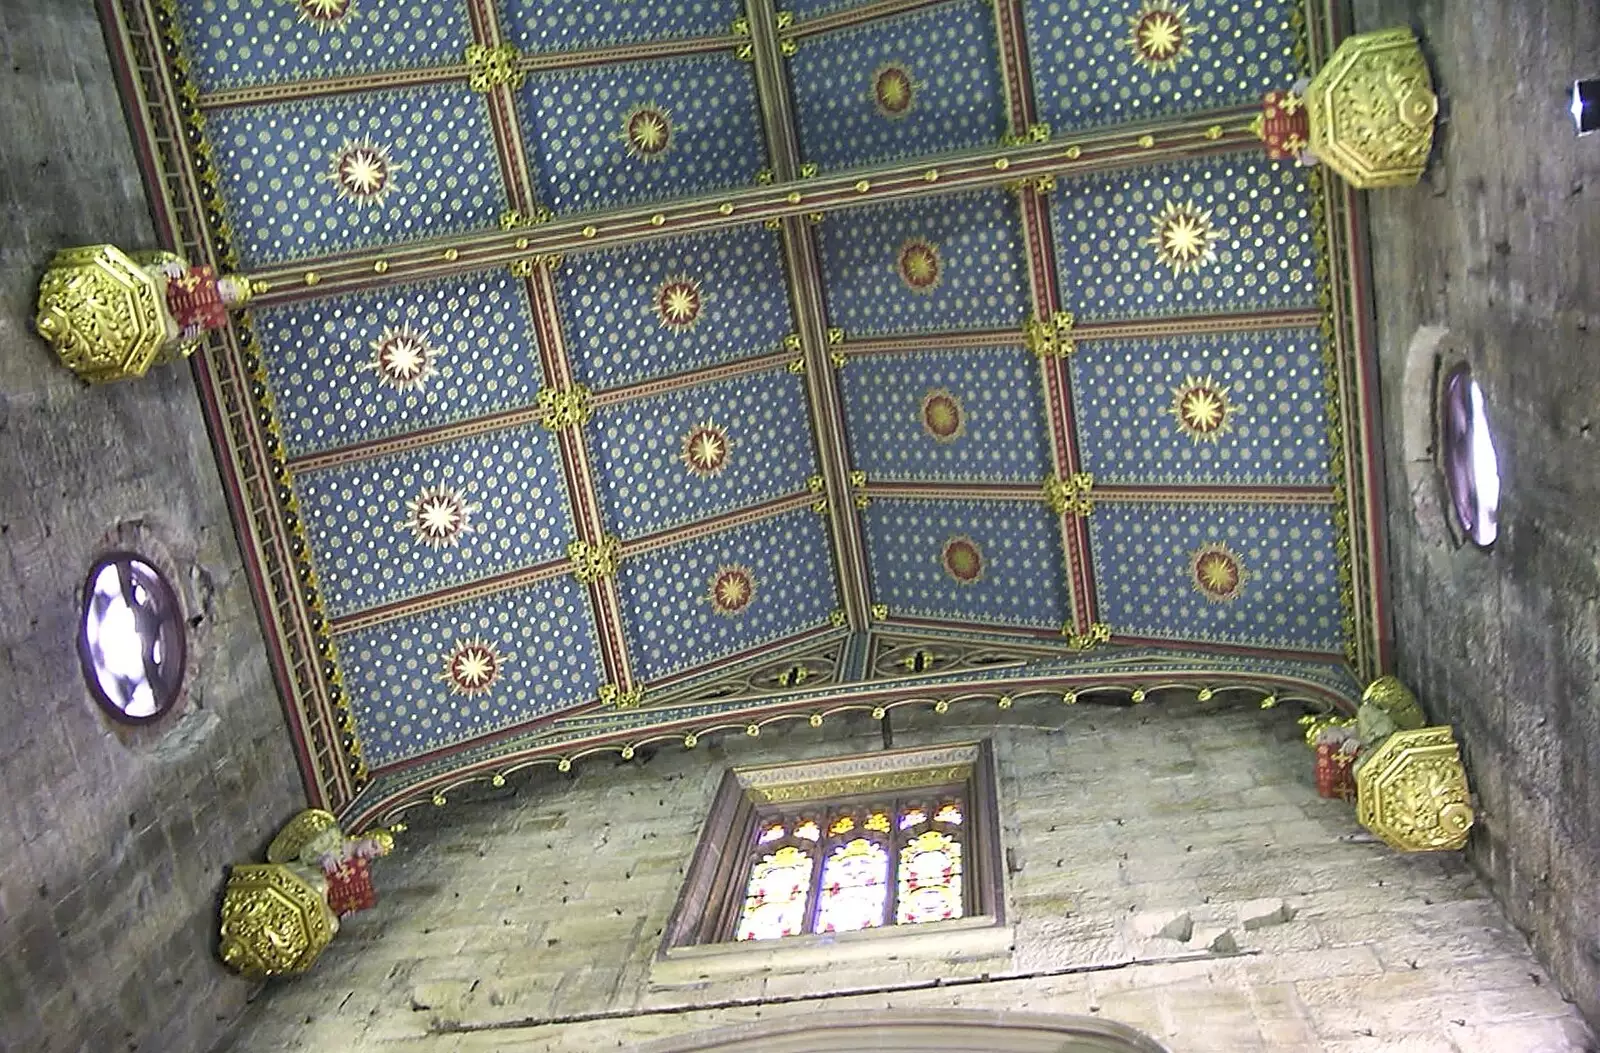 A nice roof in the house, from A Trip to Alton Towers, Staffordshire - 19th June 2004